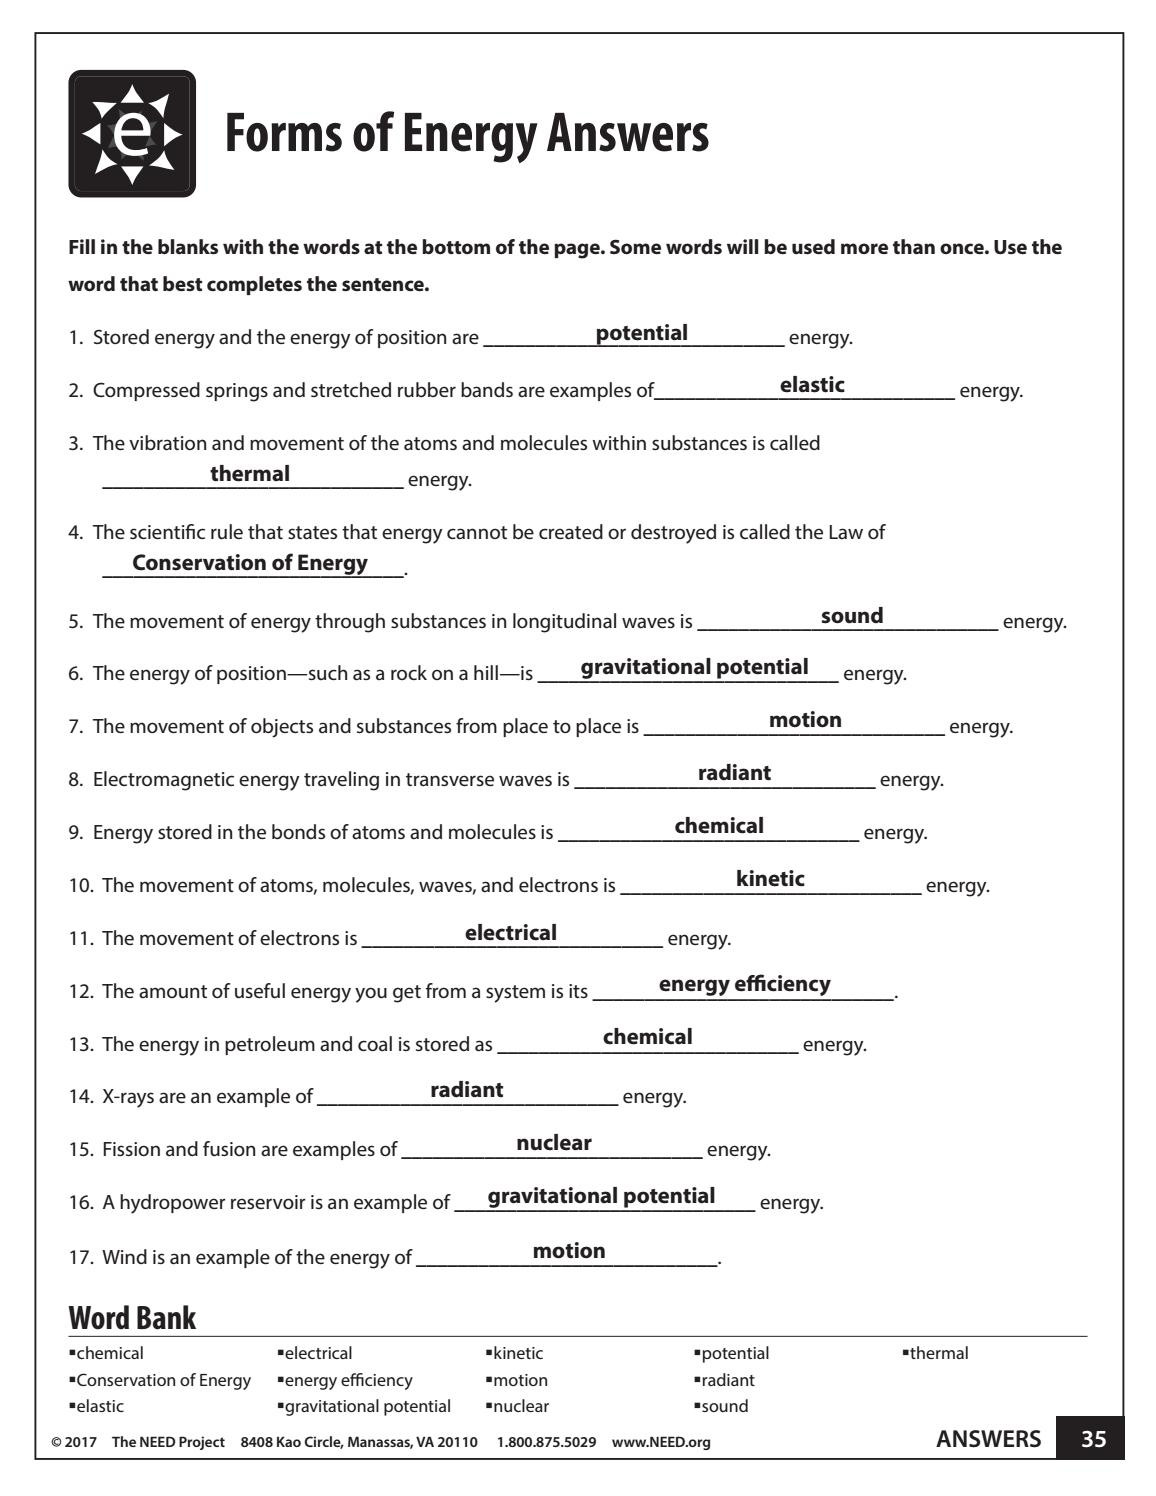 Forms Of Energy Worksheet Intermediate Energy Infobook Activities by Need Project issuu